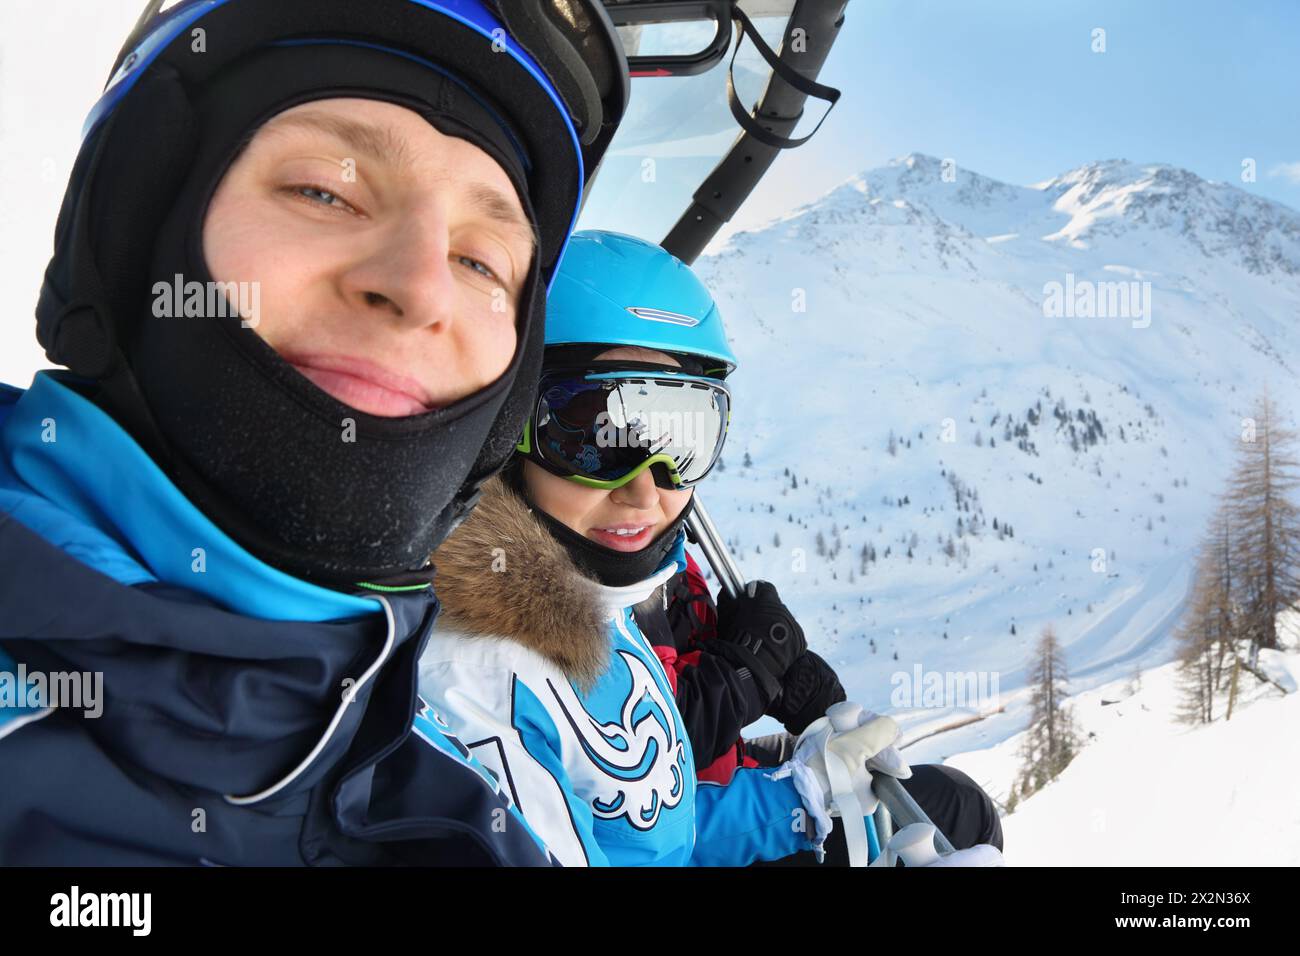 Male and female skiers in special clothing ride on cable car in mountains. Focus on woman. Stock Photo